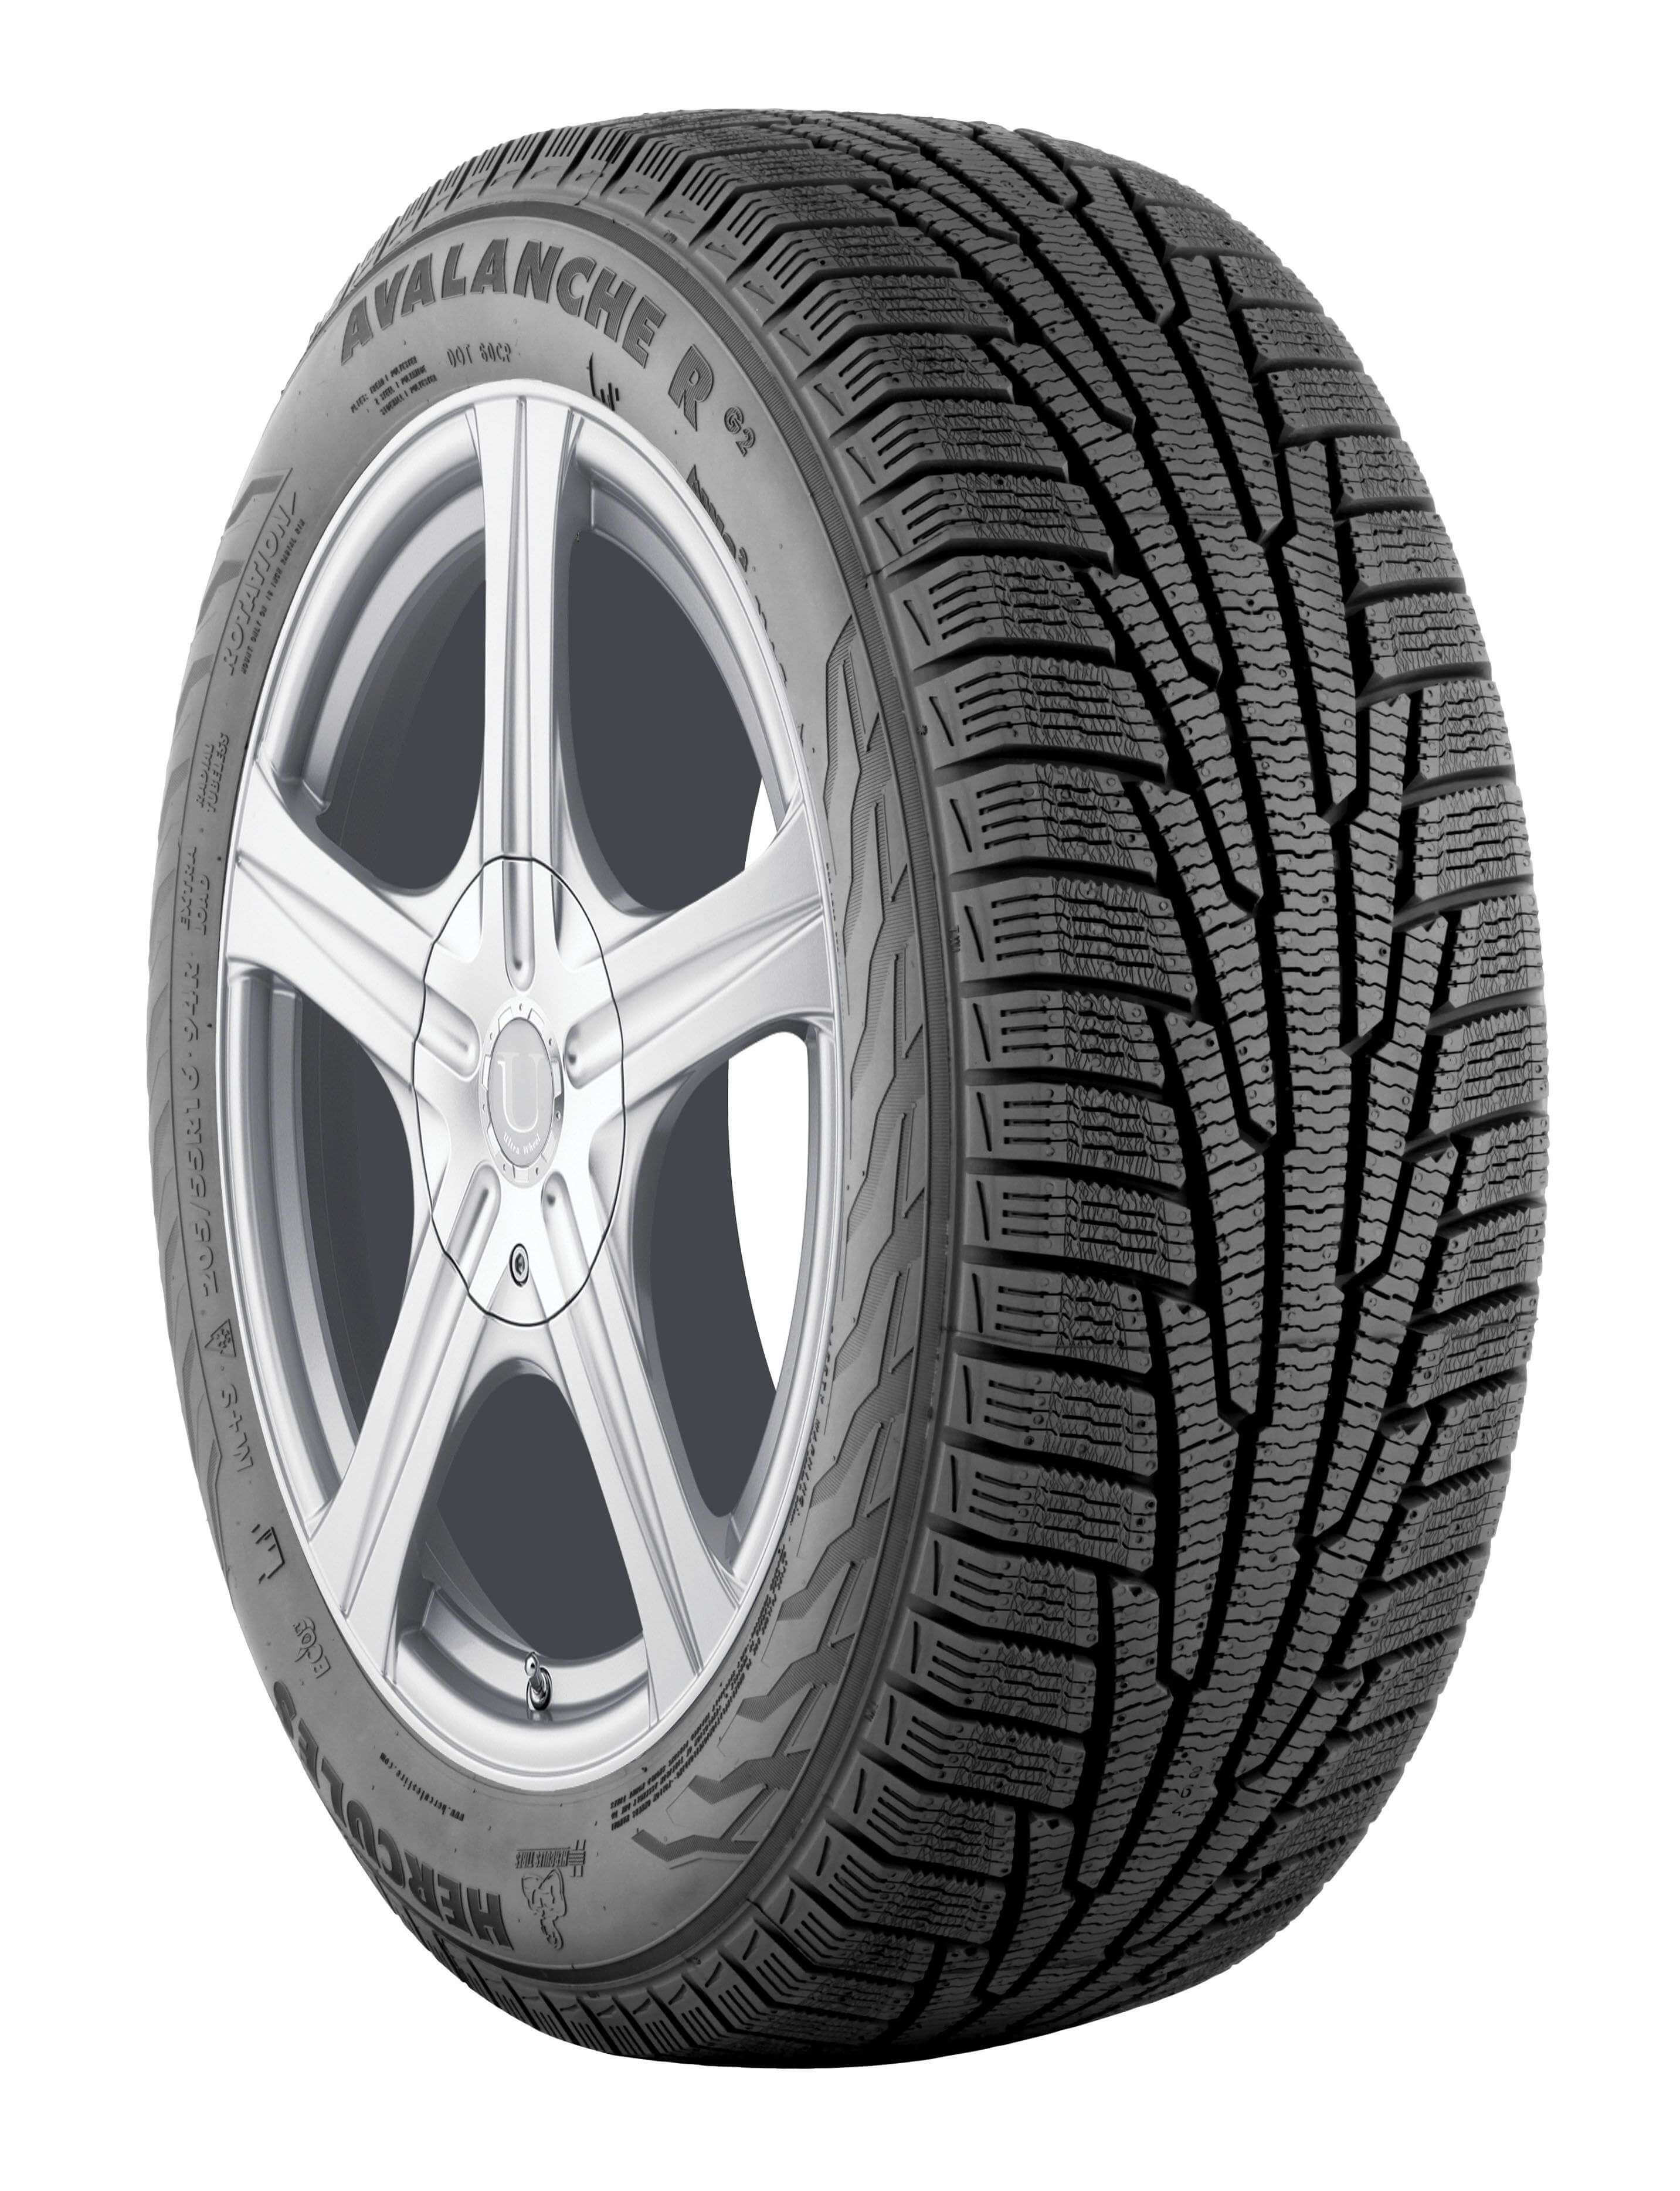 www.tireconnections.com